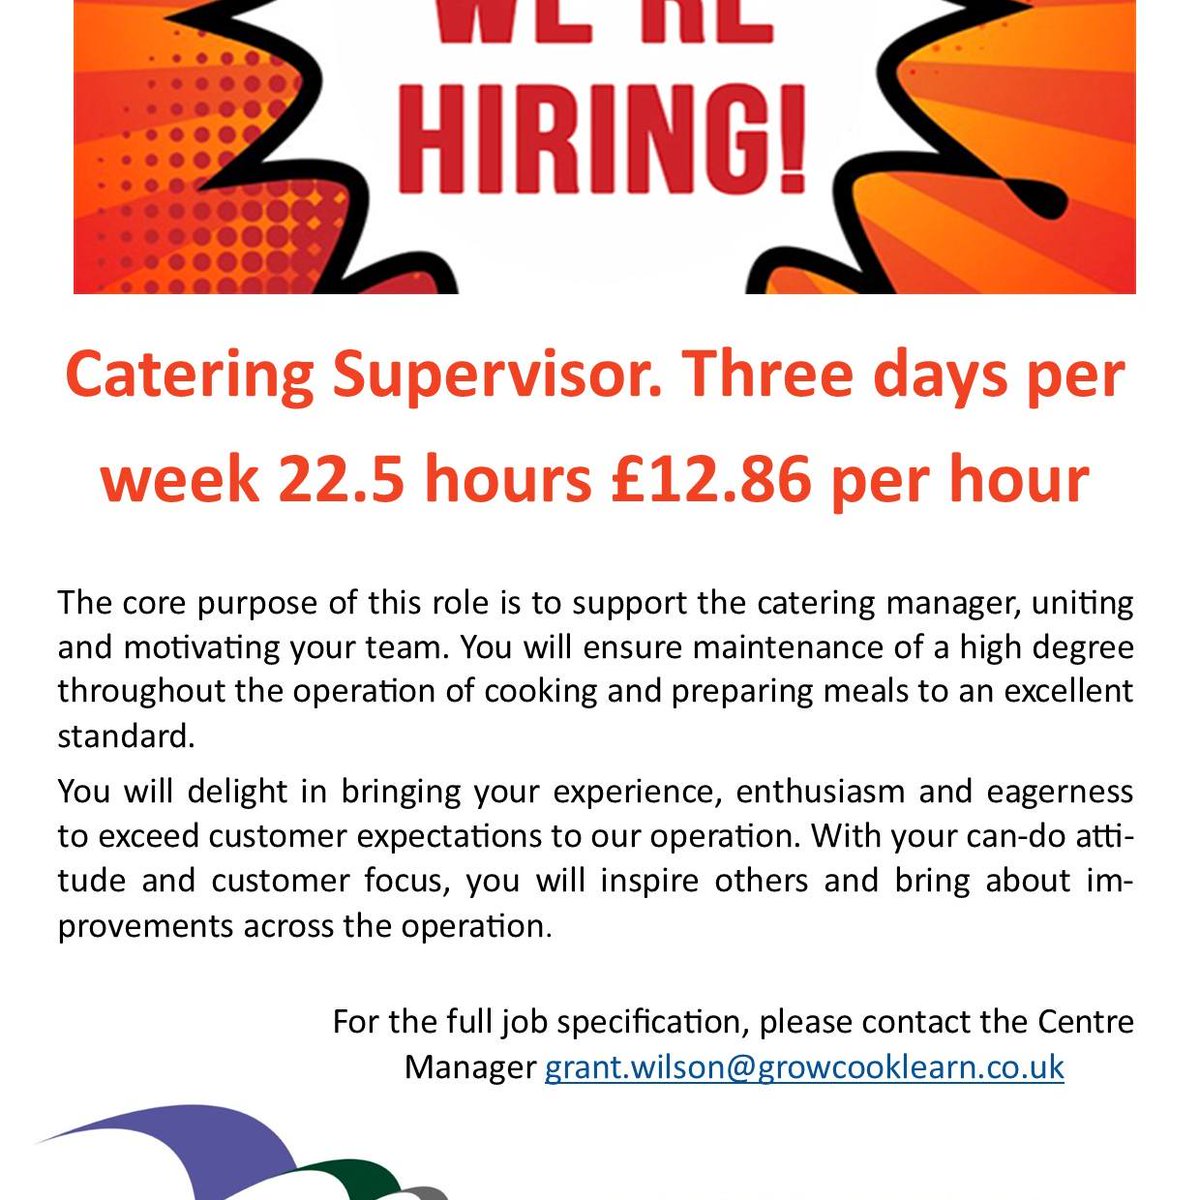 Our cafe keeps getting busier and we want somebody special to help run our catering offer. If you love preparing meals from scratch using fresh, local ingredients, baking delicious cakes and heading up the kitchen on the Catering Manager's days off, then you could be that person